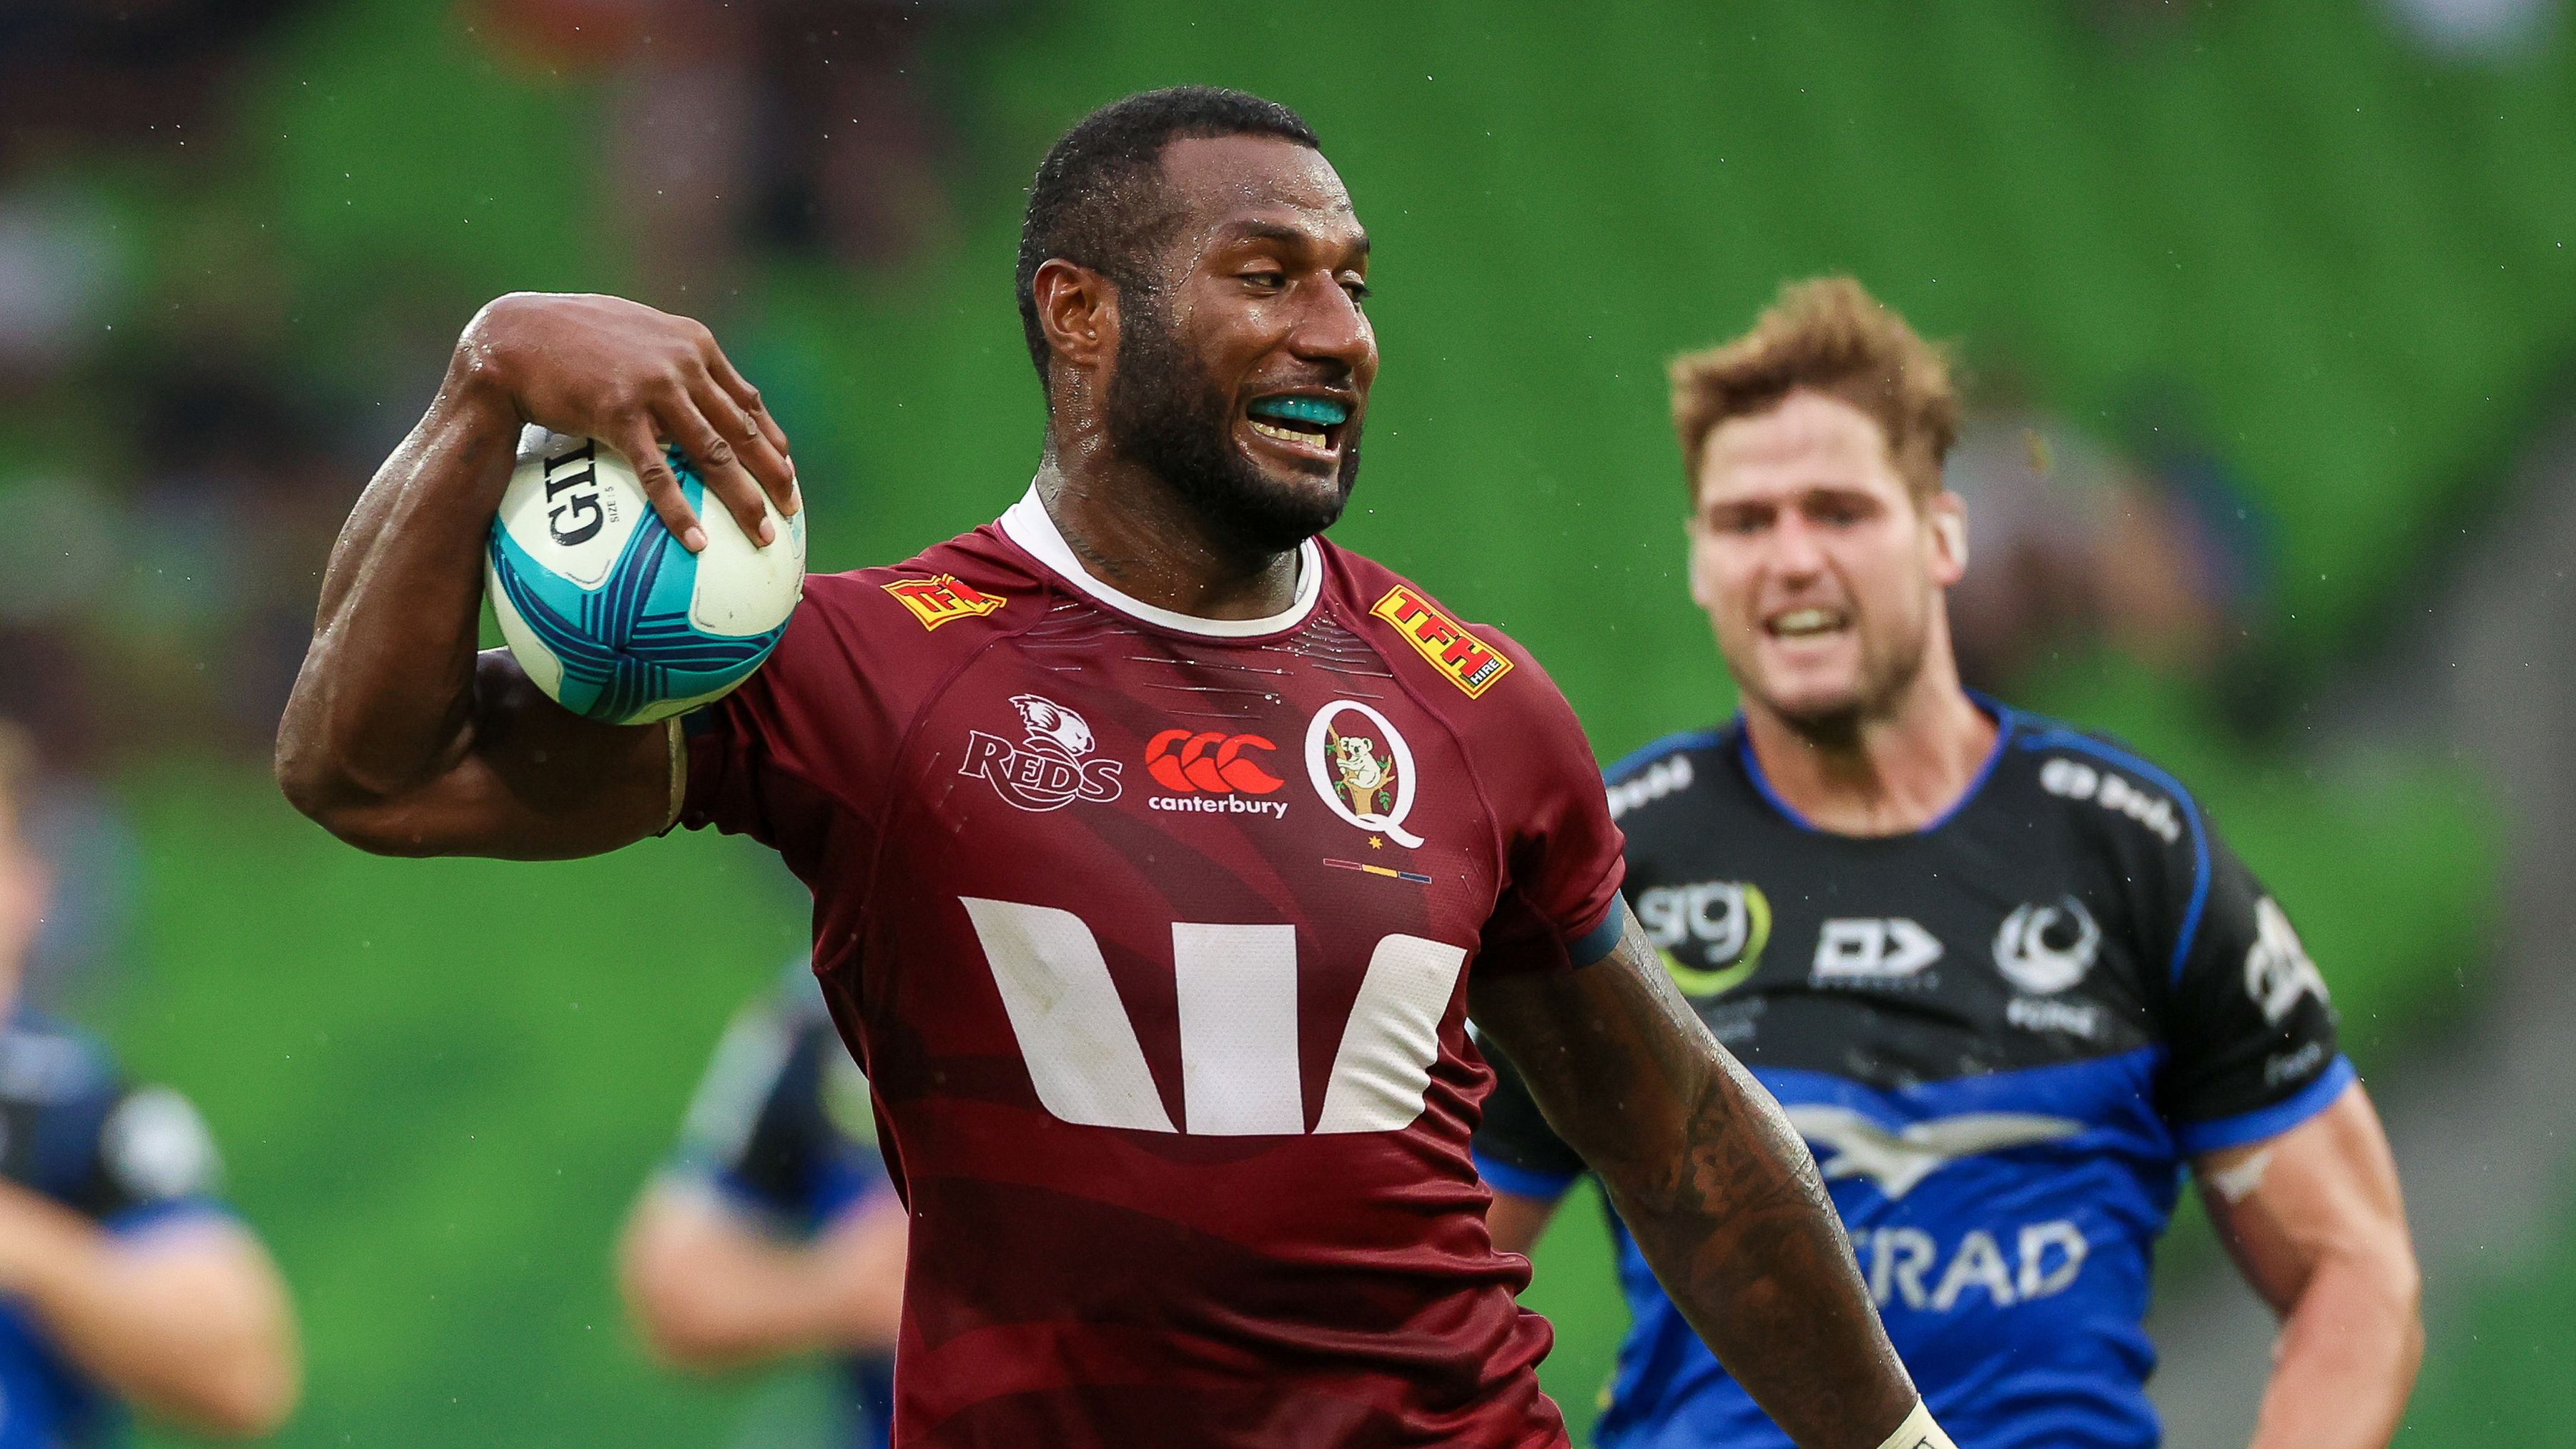 Runaway Reds star Suliasi Vunivalu's 'heart in mouth' moment leaves commentators aghast 